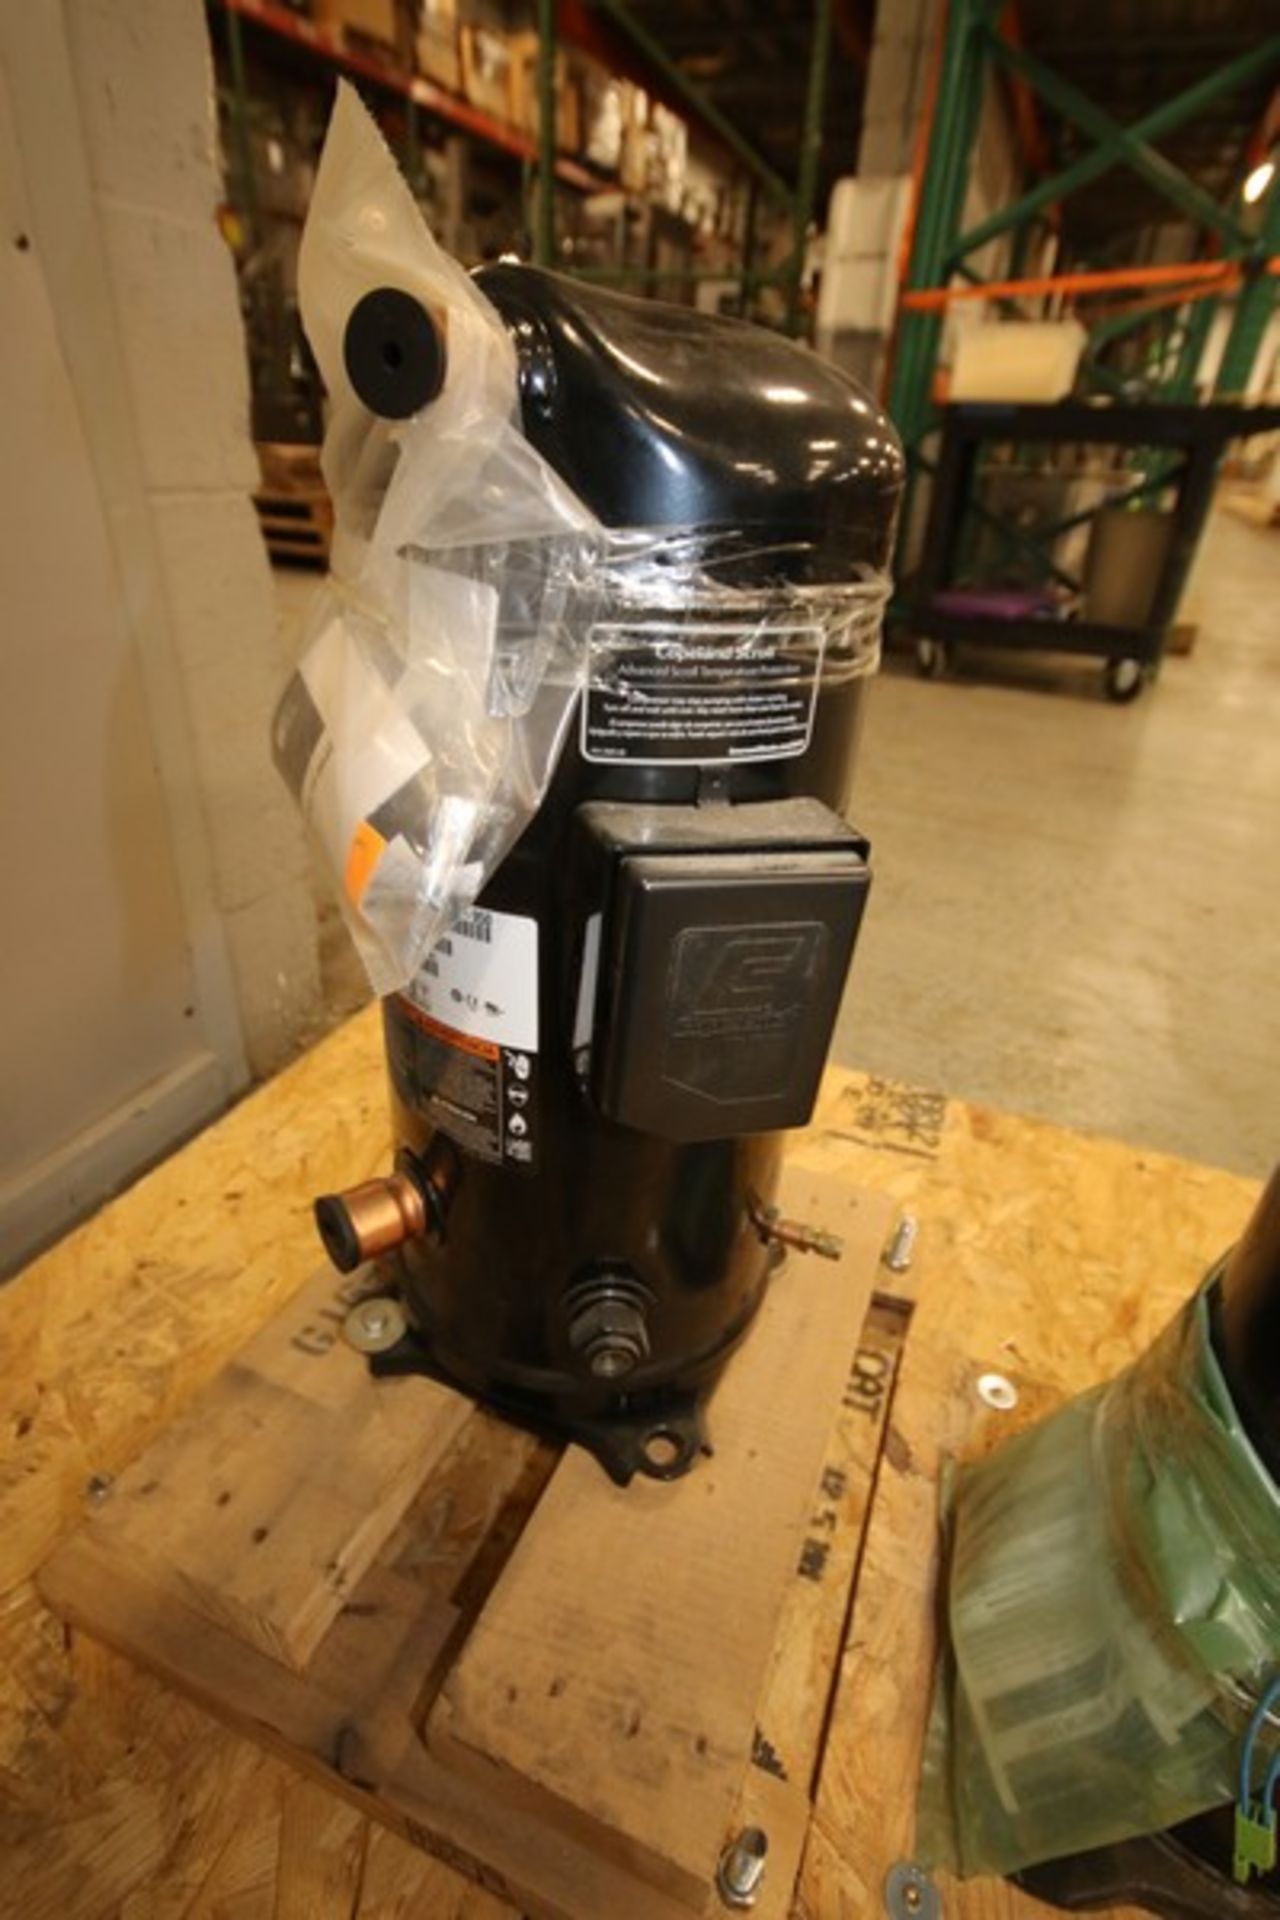 Lot of (2) New Freon Compressors Including Copeland Scroll Model ZP103KCE-TFD-950, SN 16GC626D, 460V - Image 2 of 5